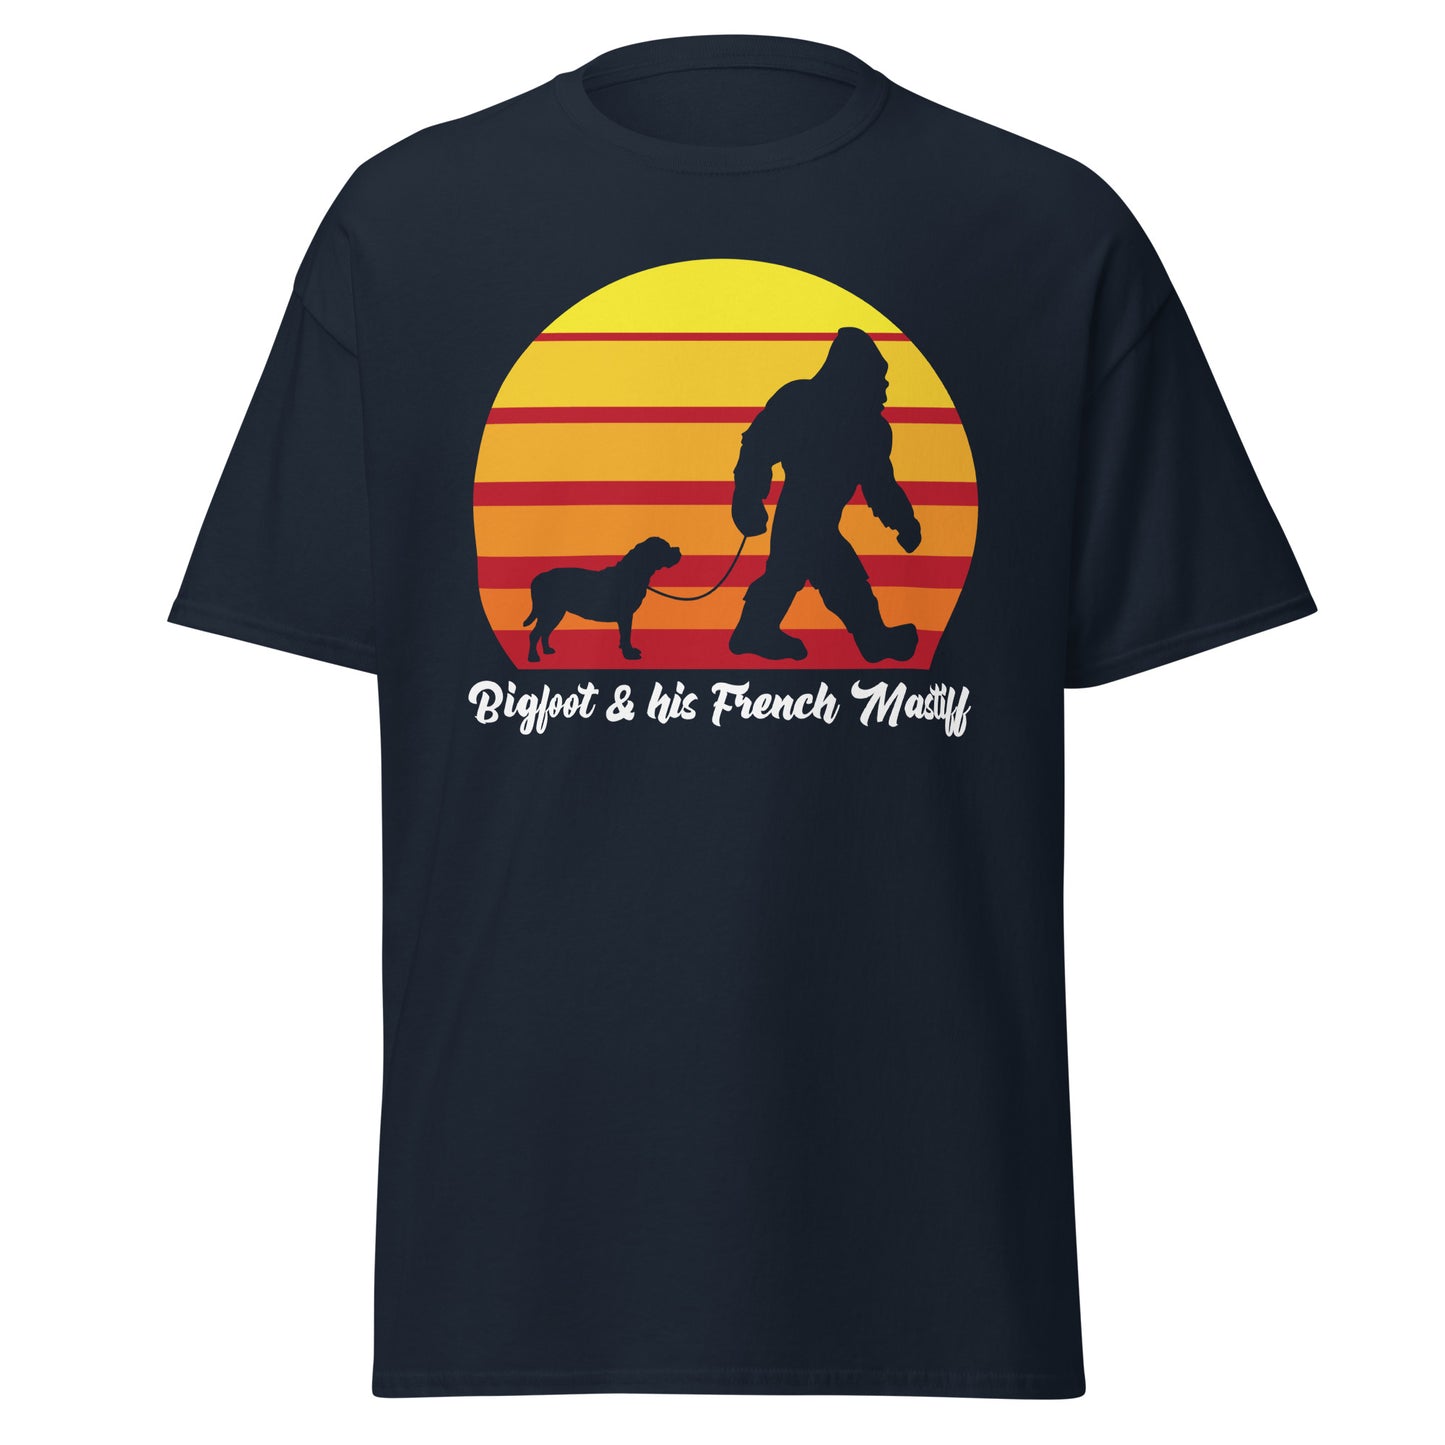 Big foot and his French Mastiff men’s navy t-shirt by Dog Artistry.